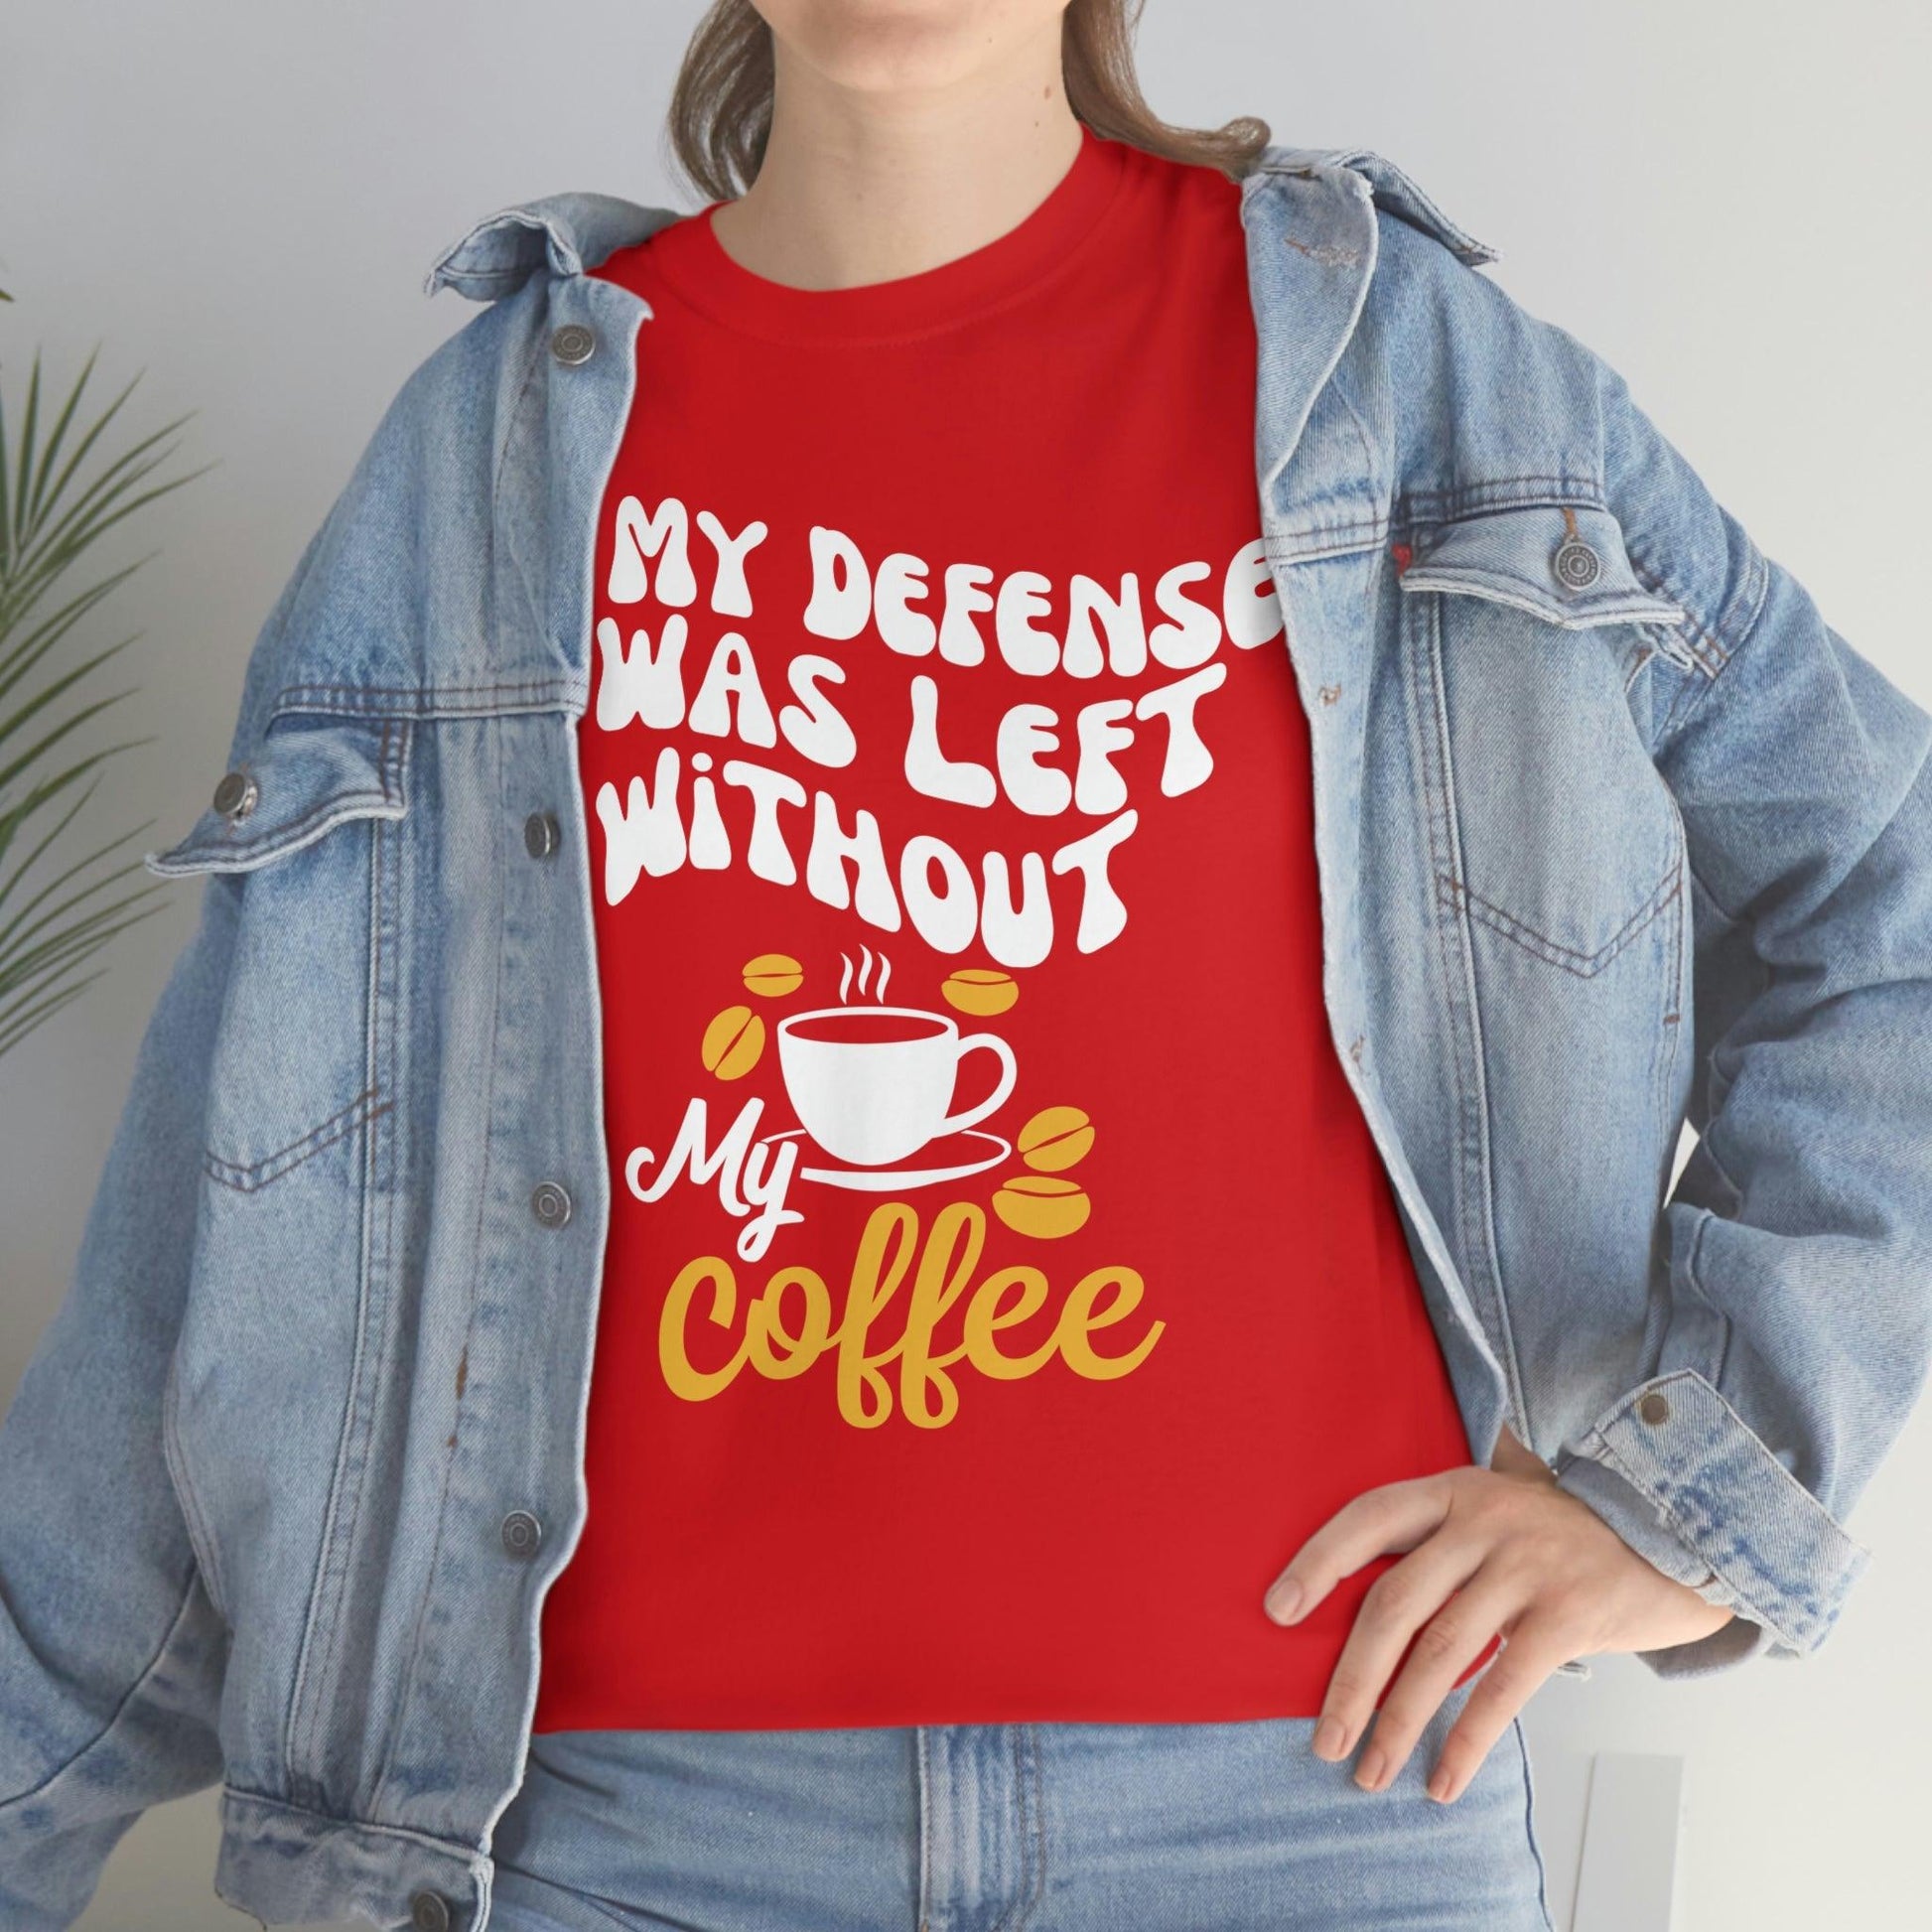 In My defense I was left without coffee Tee - Giftsmojo